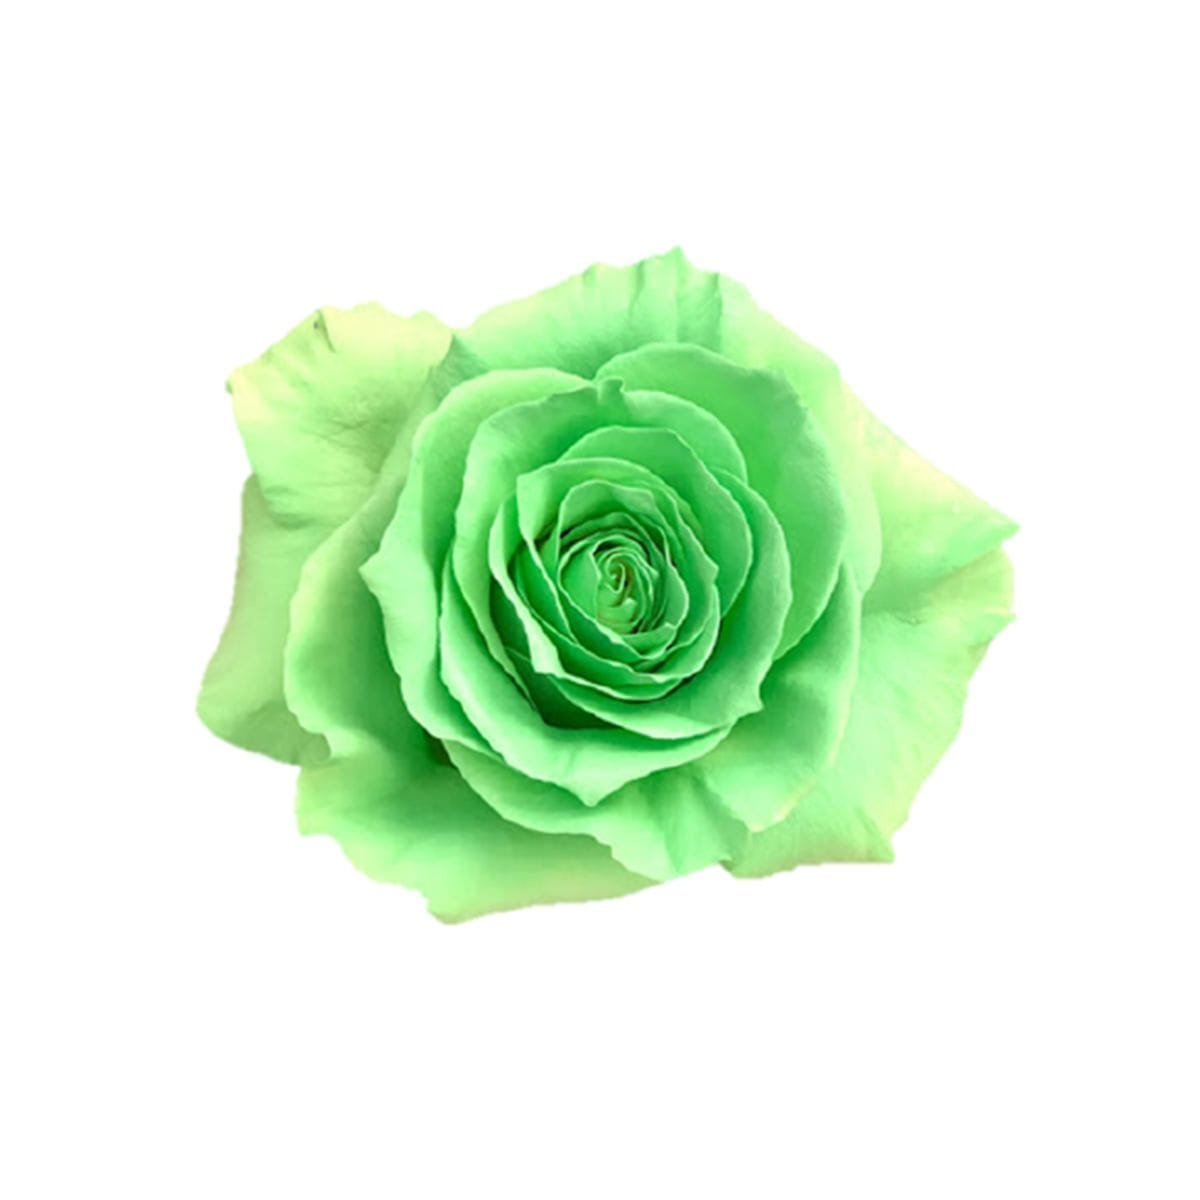 Neon Green Preserved Roses, Rose Transparent